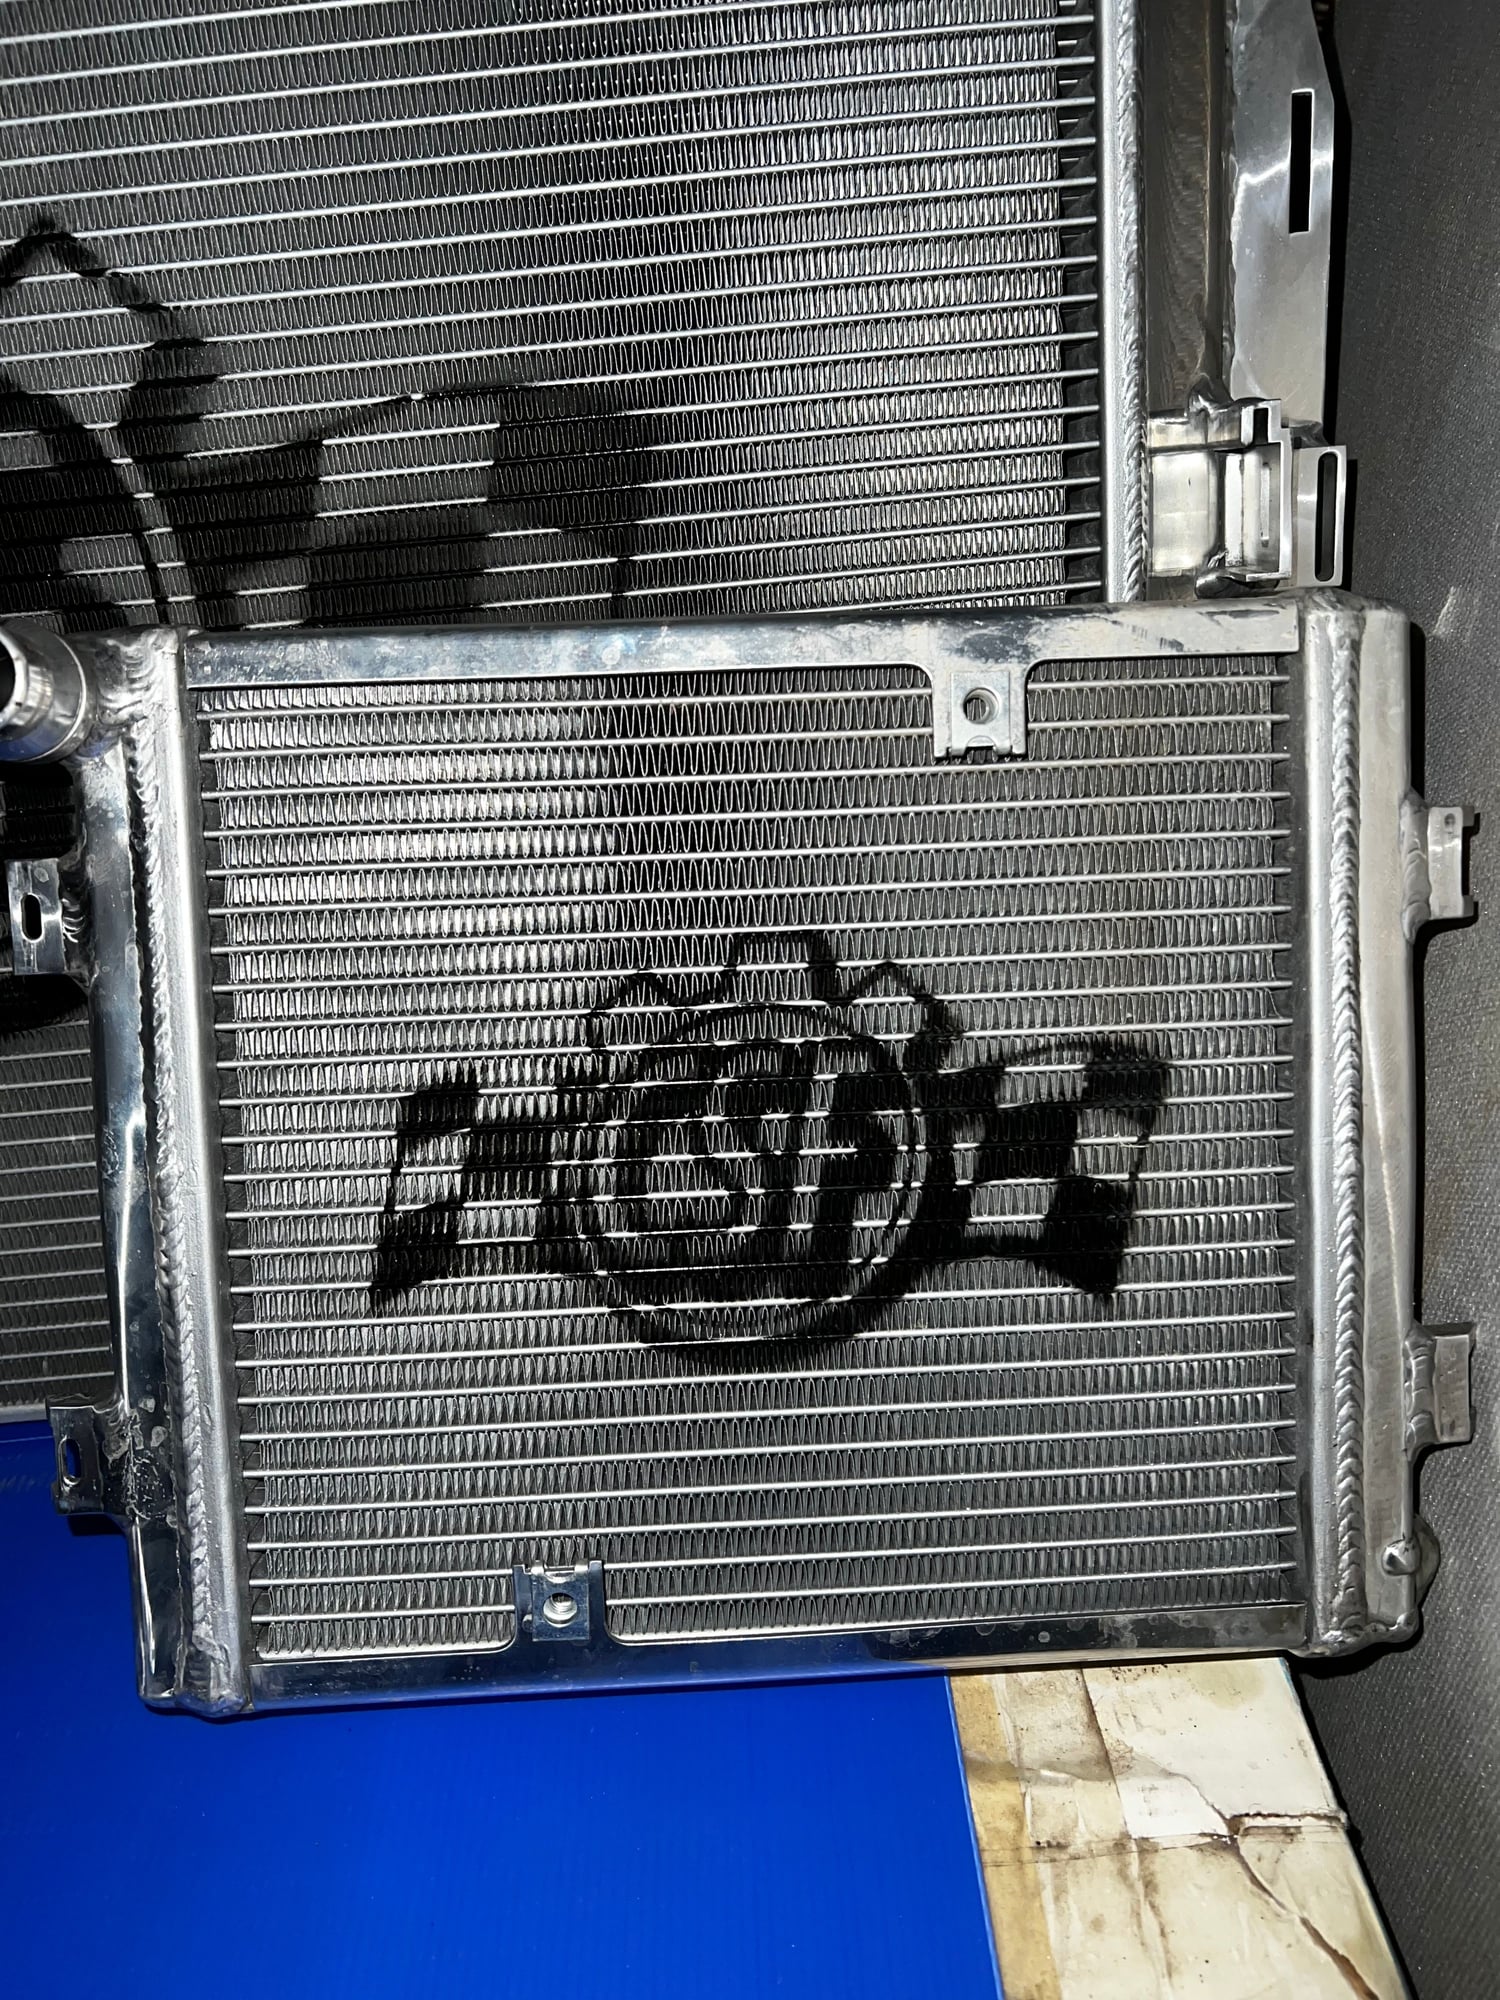 Engine - Power Adders - Csf Heat Exchangers (primary and both auxiliary) - Used - 2016 to 2021 Mercedes-Benz C63 AMG S - 2016 to 2017 Mercedes-Benz AMG GT S - 2017 to 2019 Mercedes-Benz GLS63 AMG - 2016 to 2019 Mercedes-Benz GLE63 AMG S - Hayward, CA 94544, United States